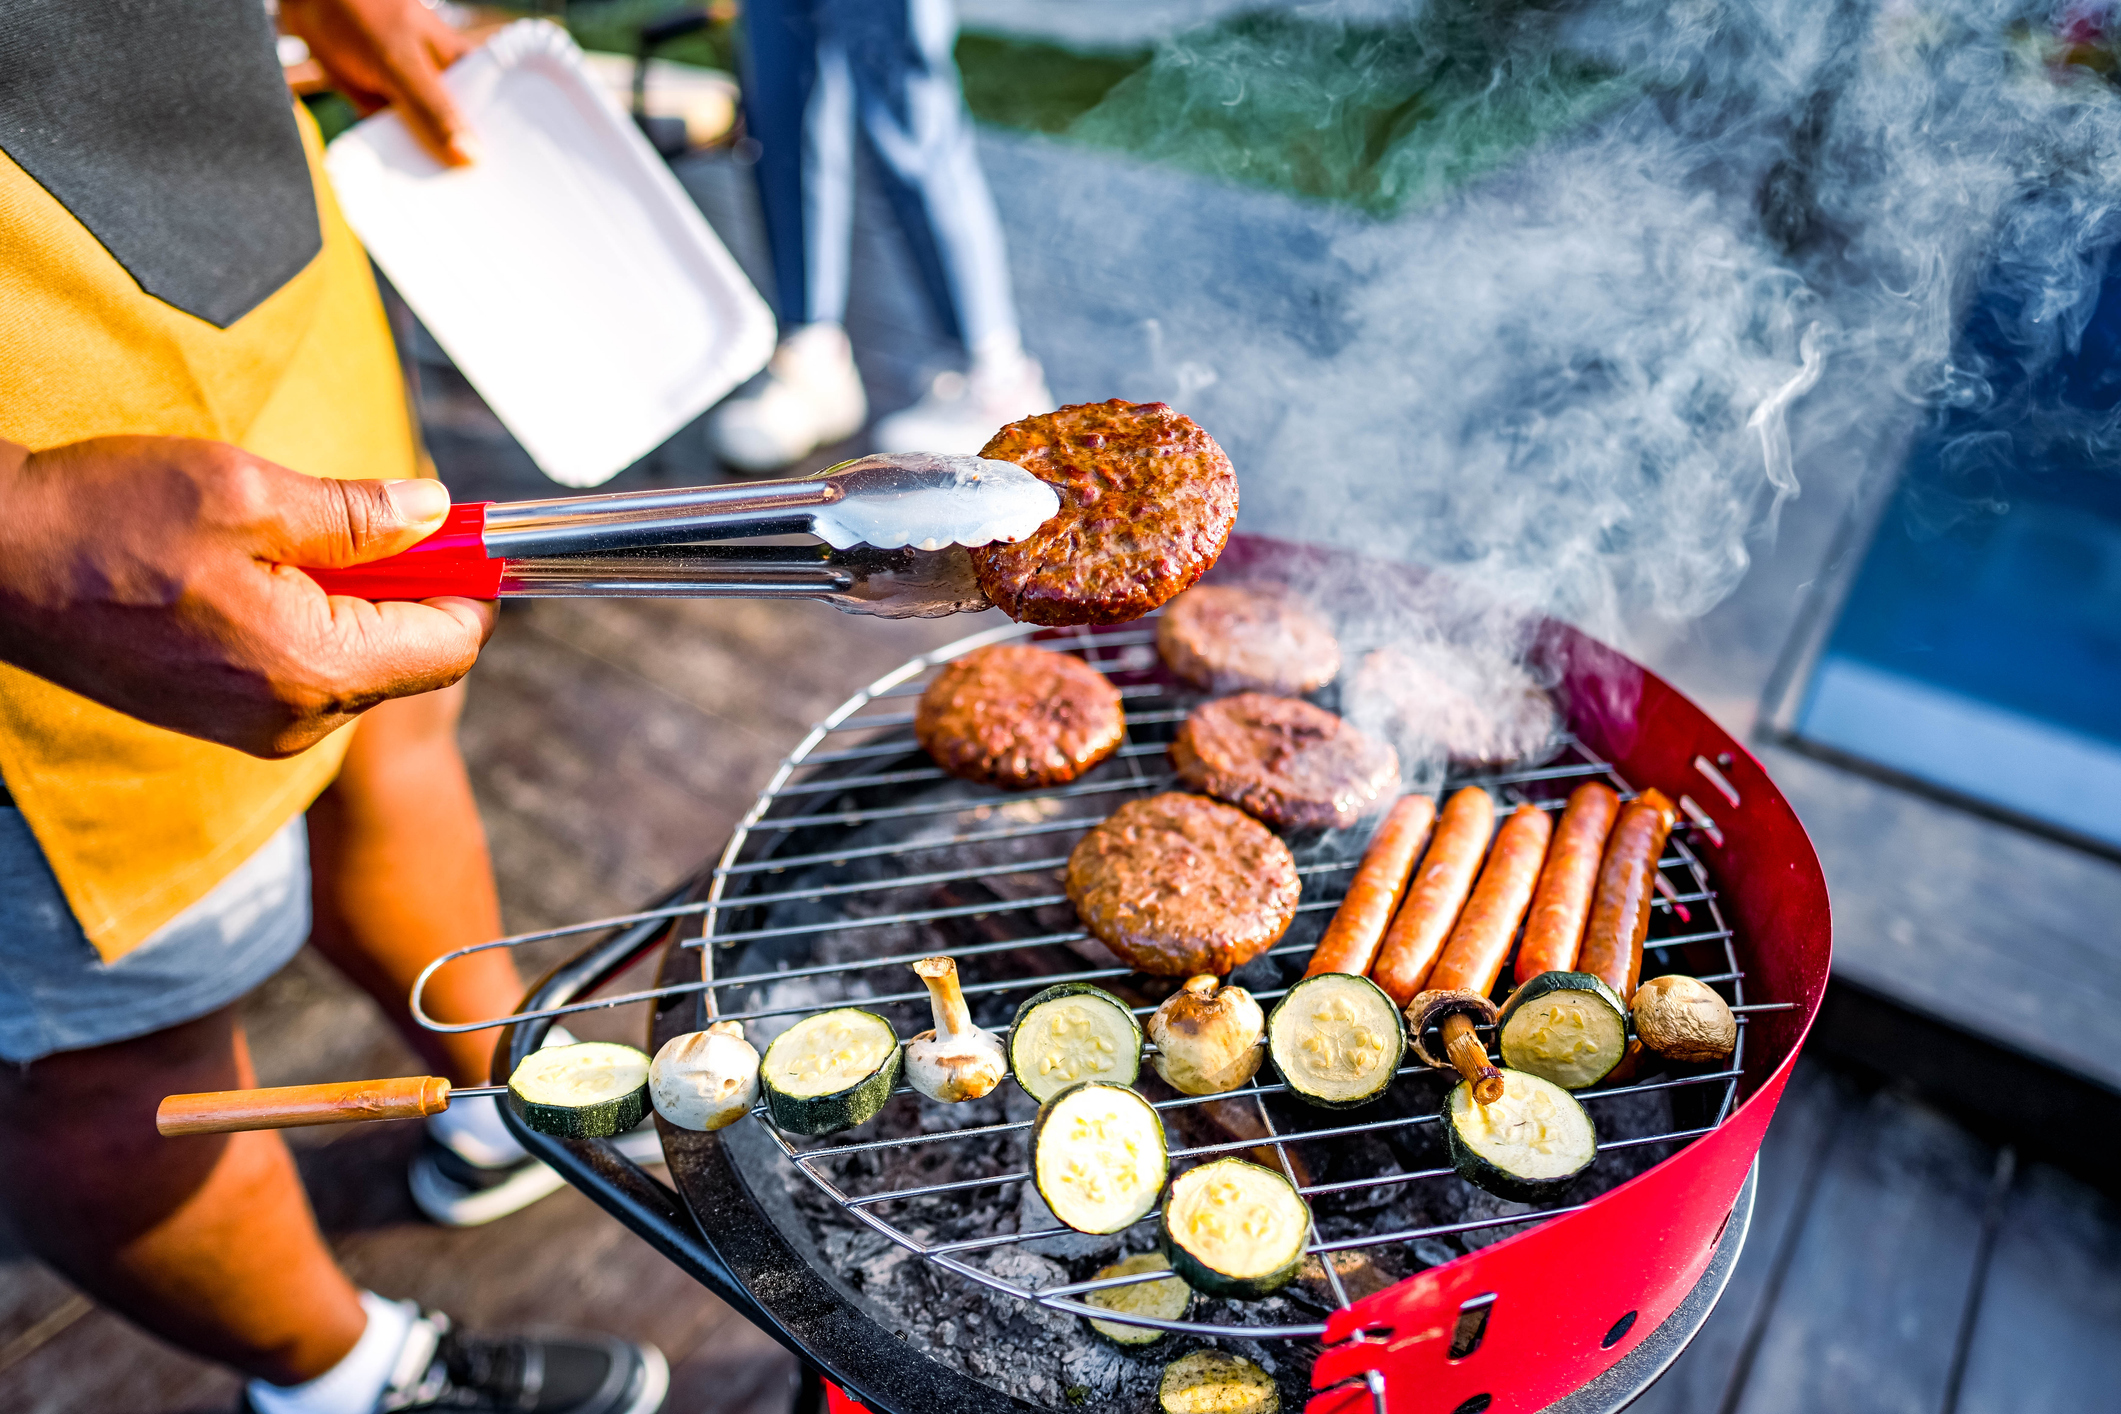 Burgers, hot dogs and vegetables on a charcoal grill.